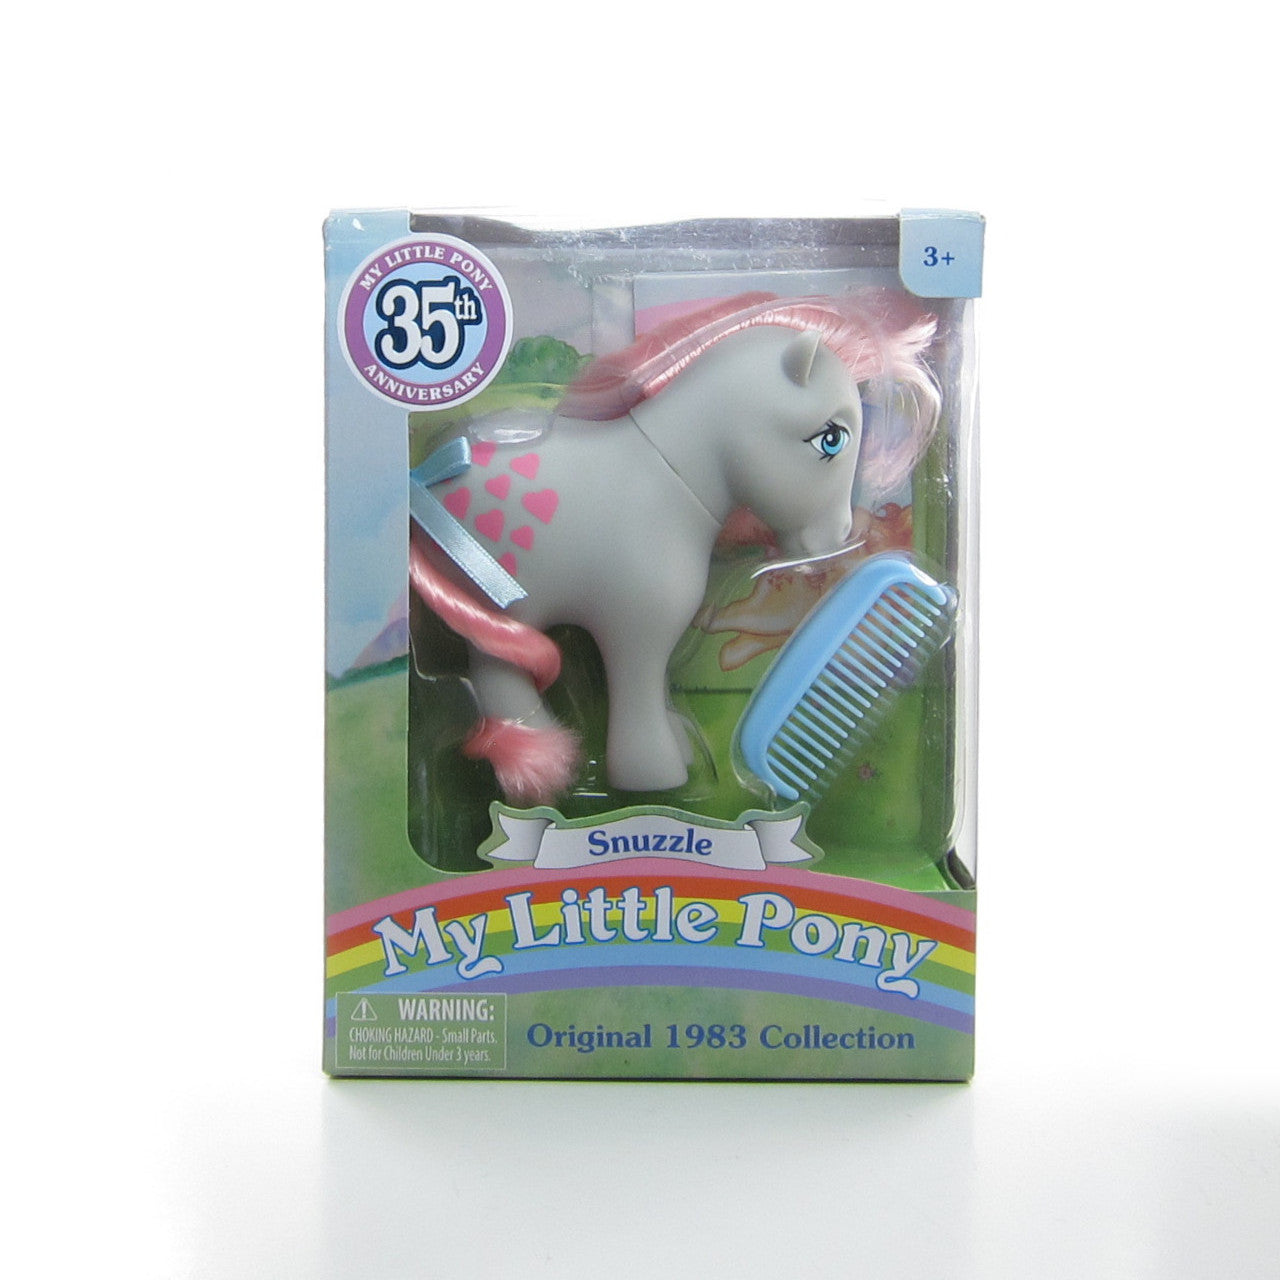 Snuzzle 35th Anniversary My Little Pony toy